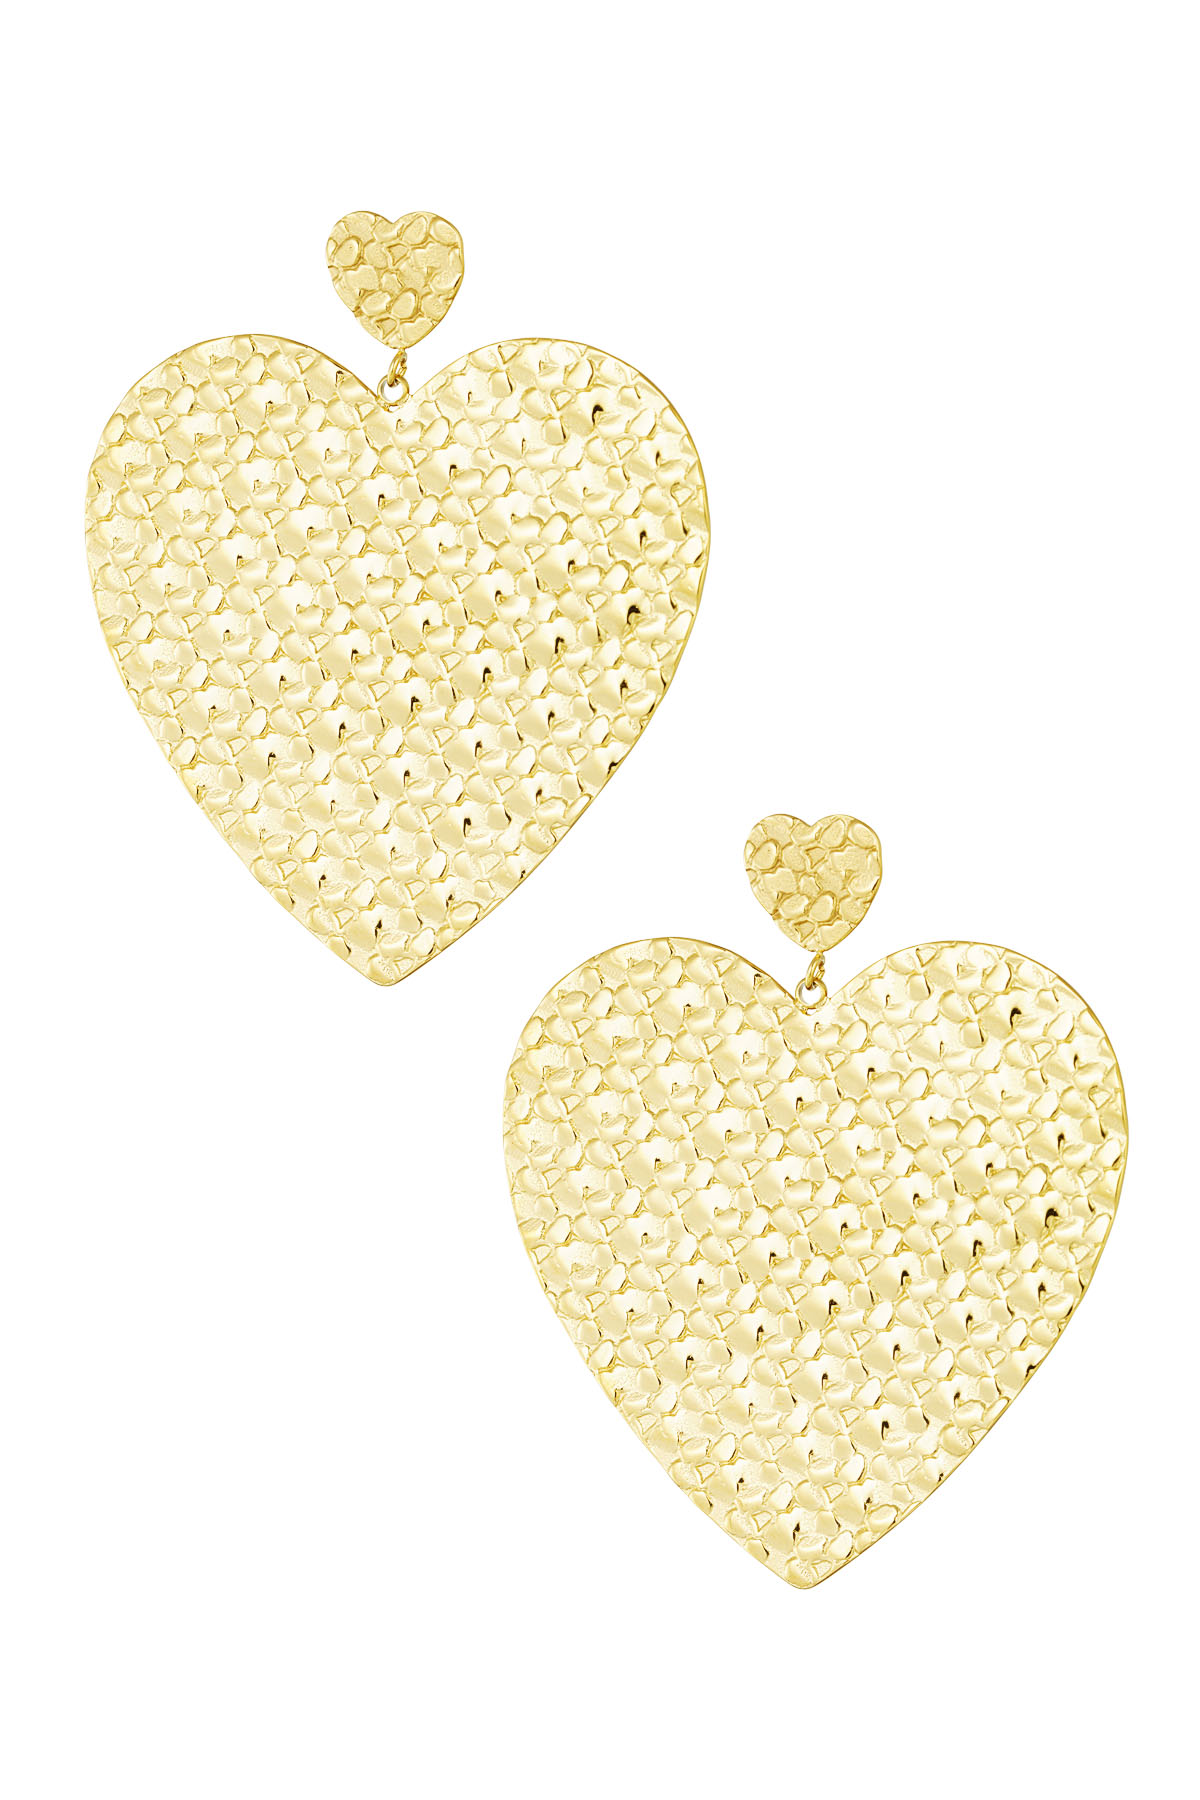 Small heart earring with large heart pendant - gold